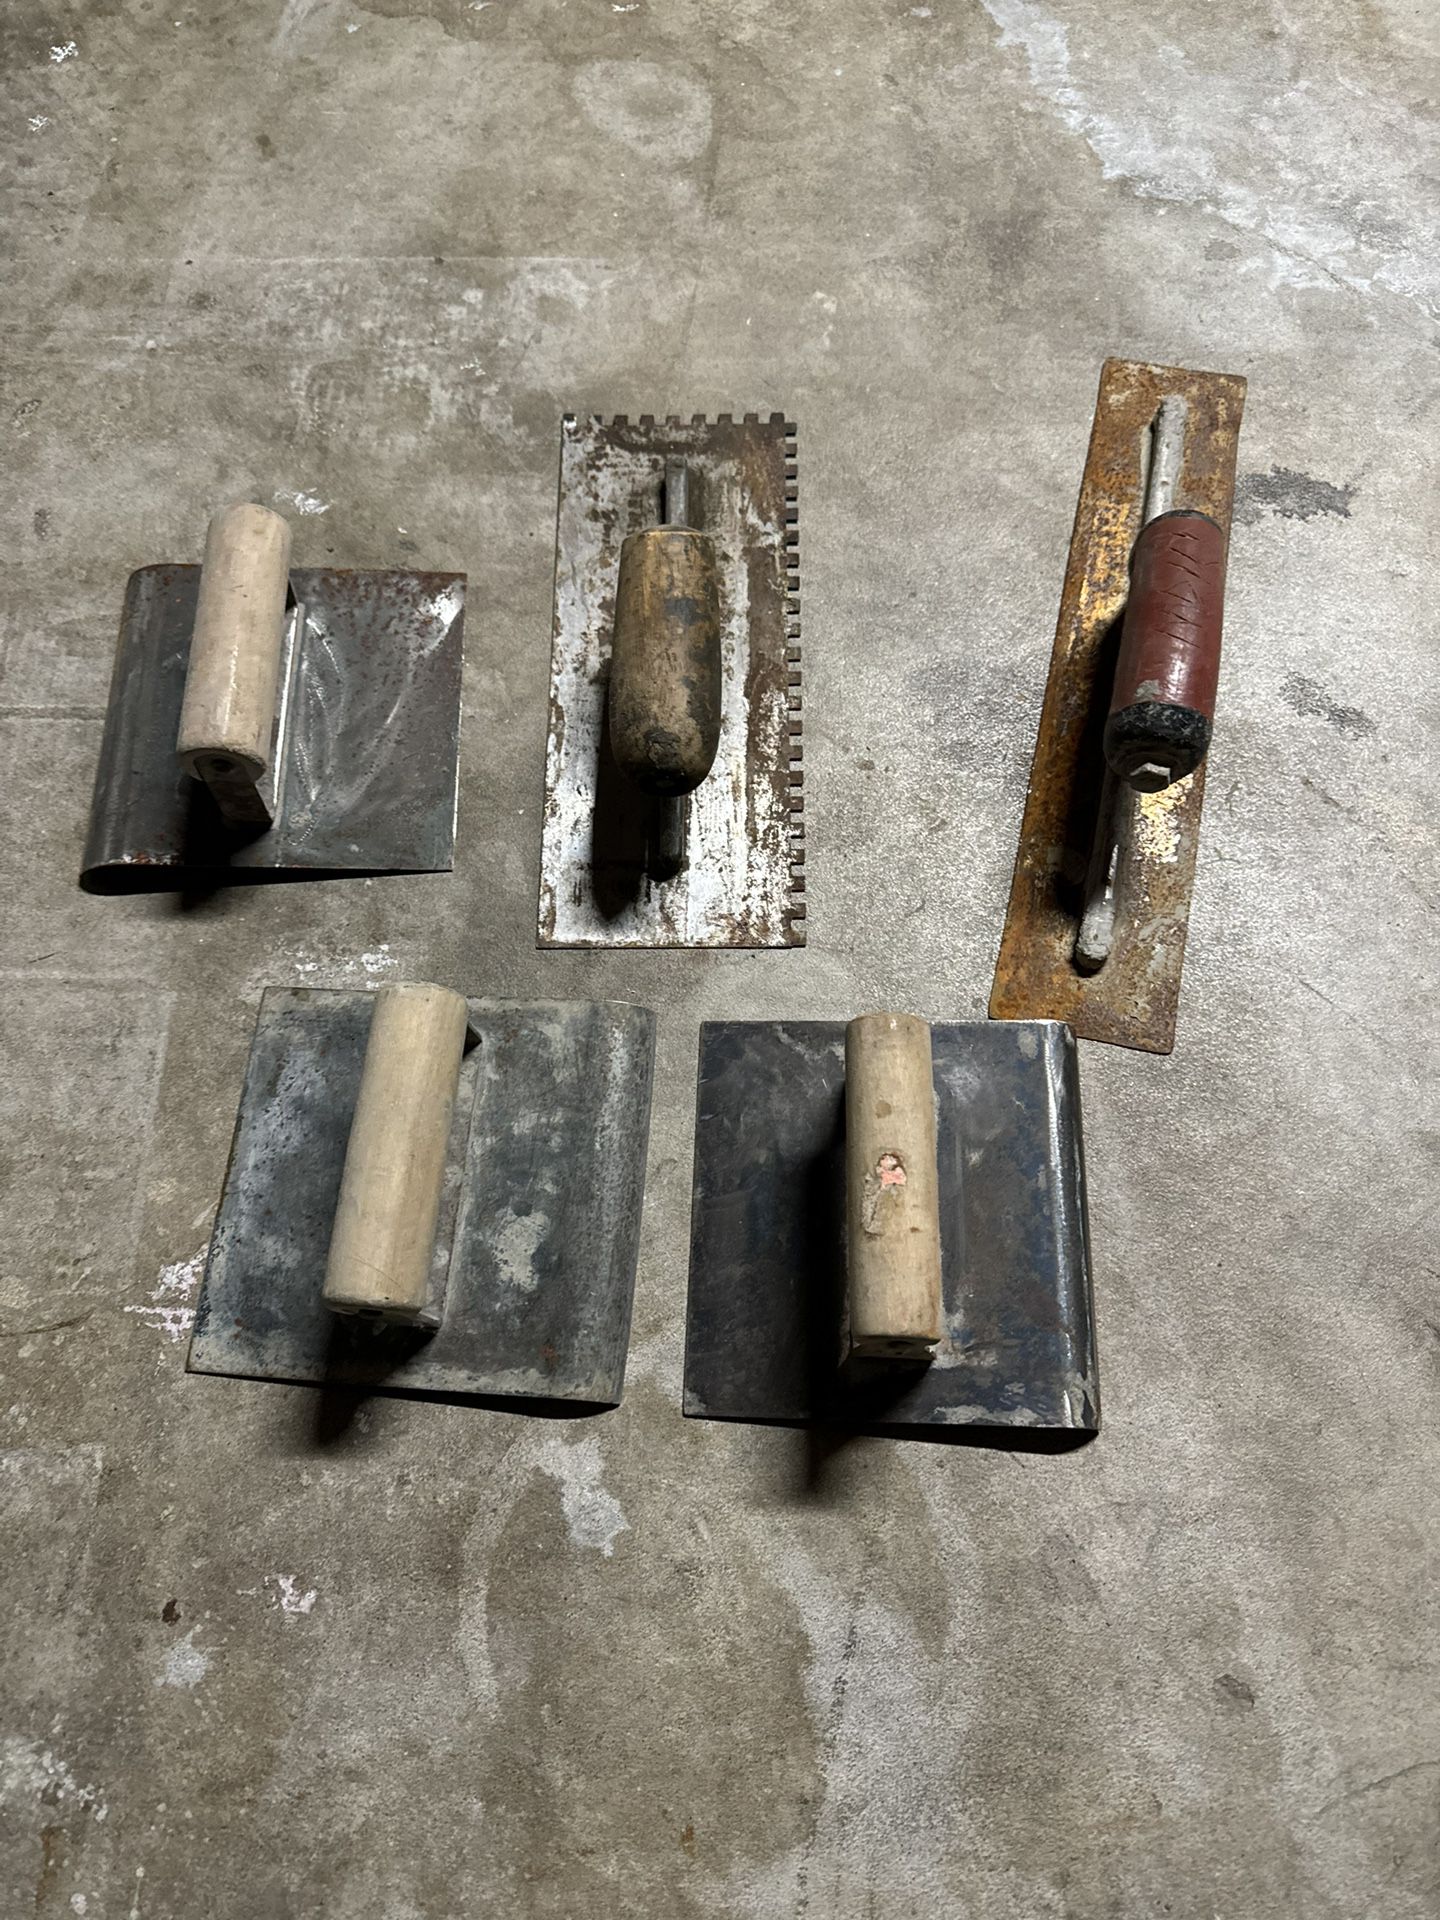 Cement Tools 